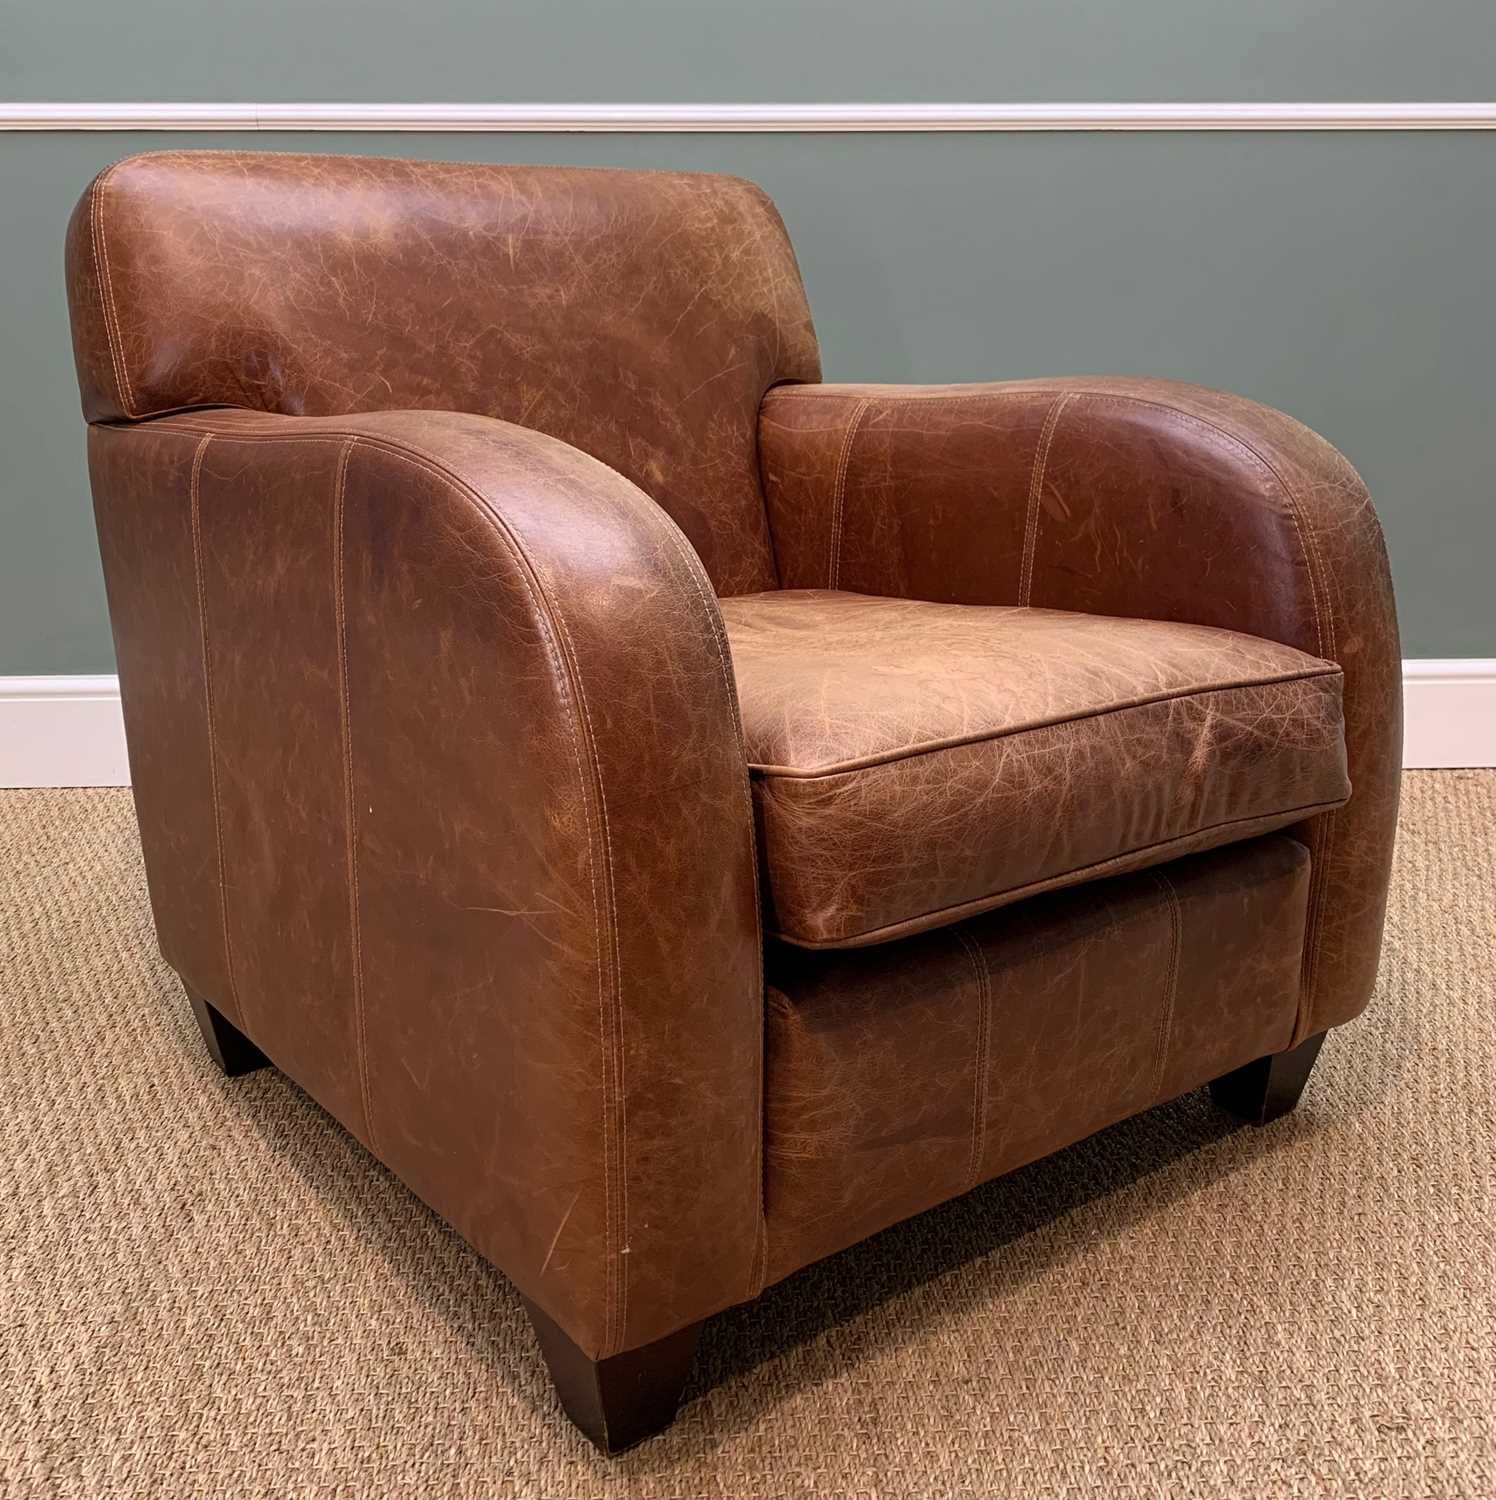 LAURA ASHLEY SEATING FURNITURE, comprising ART DECO STYLE LEATHER ARMCHAIR, loose cushion, double - Image 12 of 16